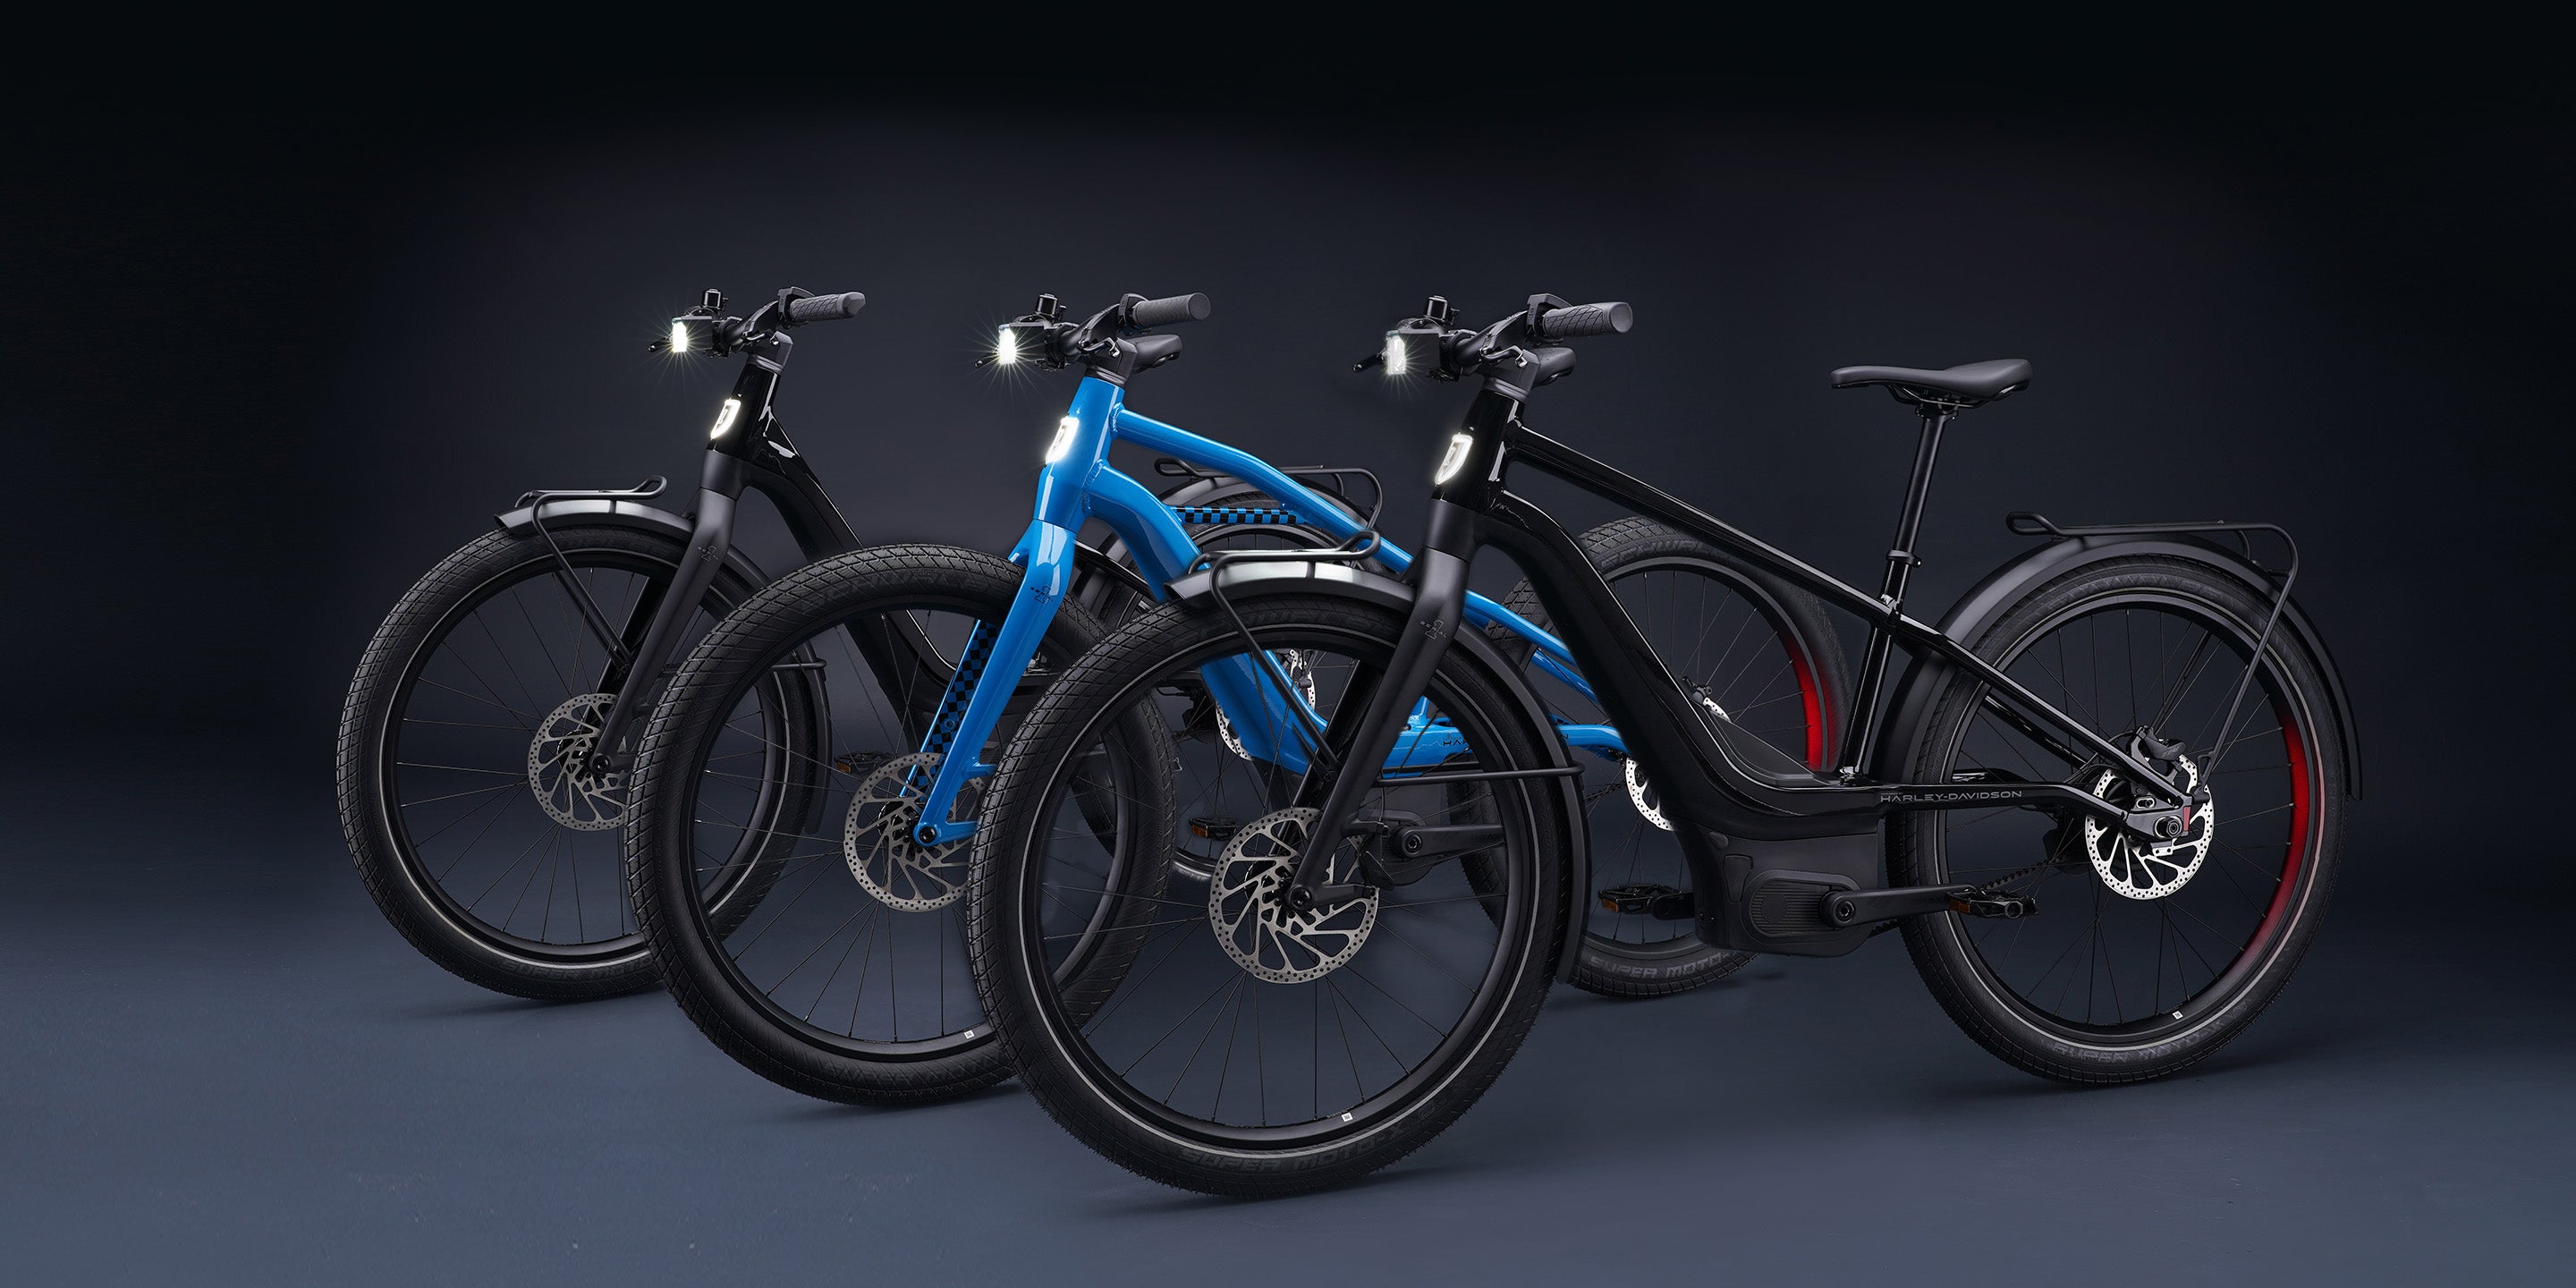 Serial 1 Cycle Company Powered by Harley-Davidson eBicycles